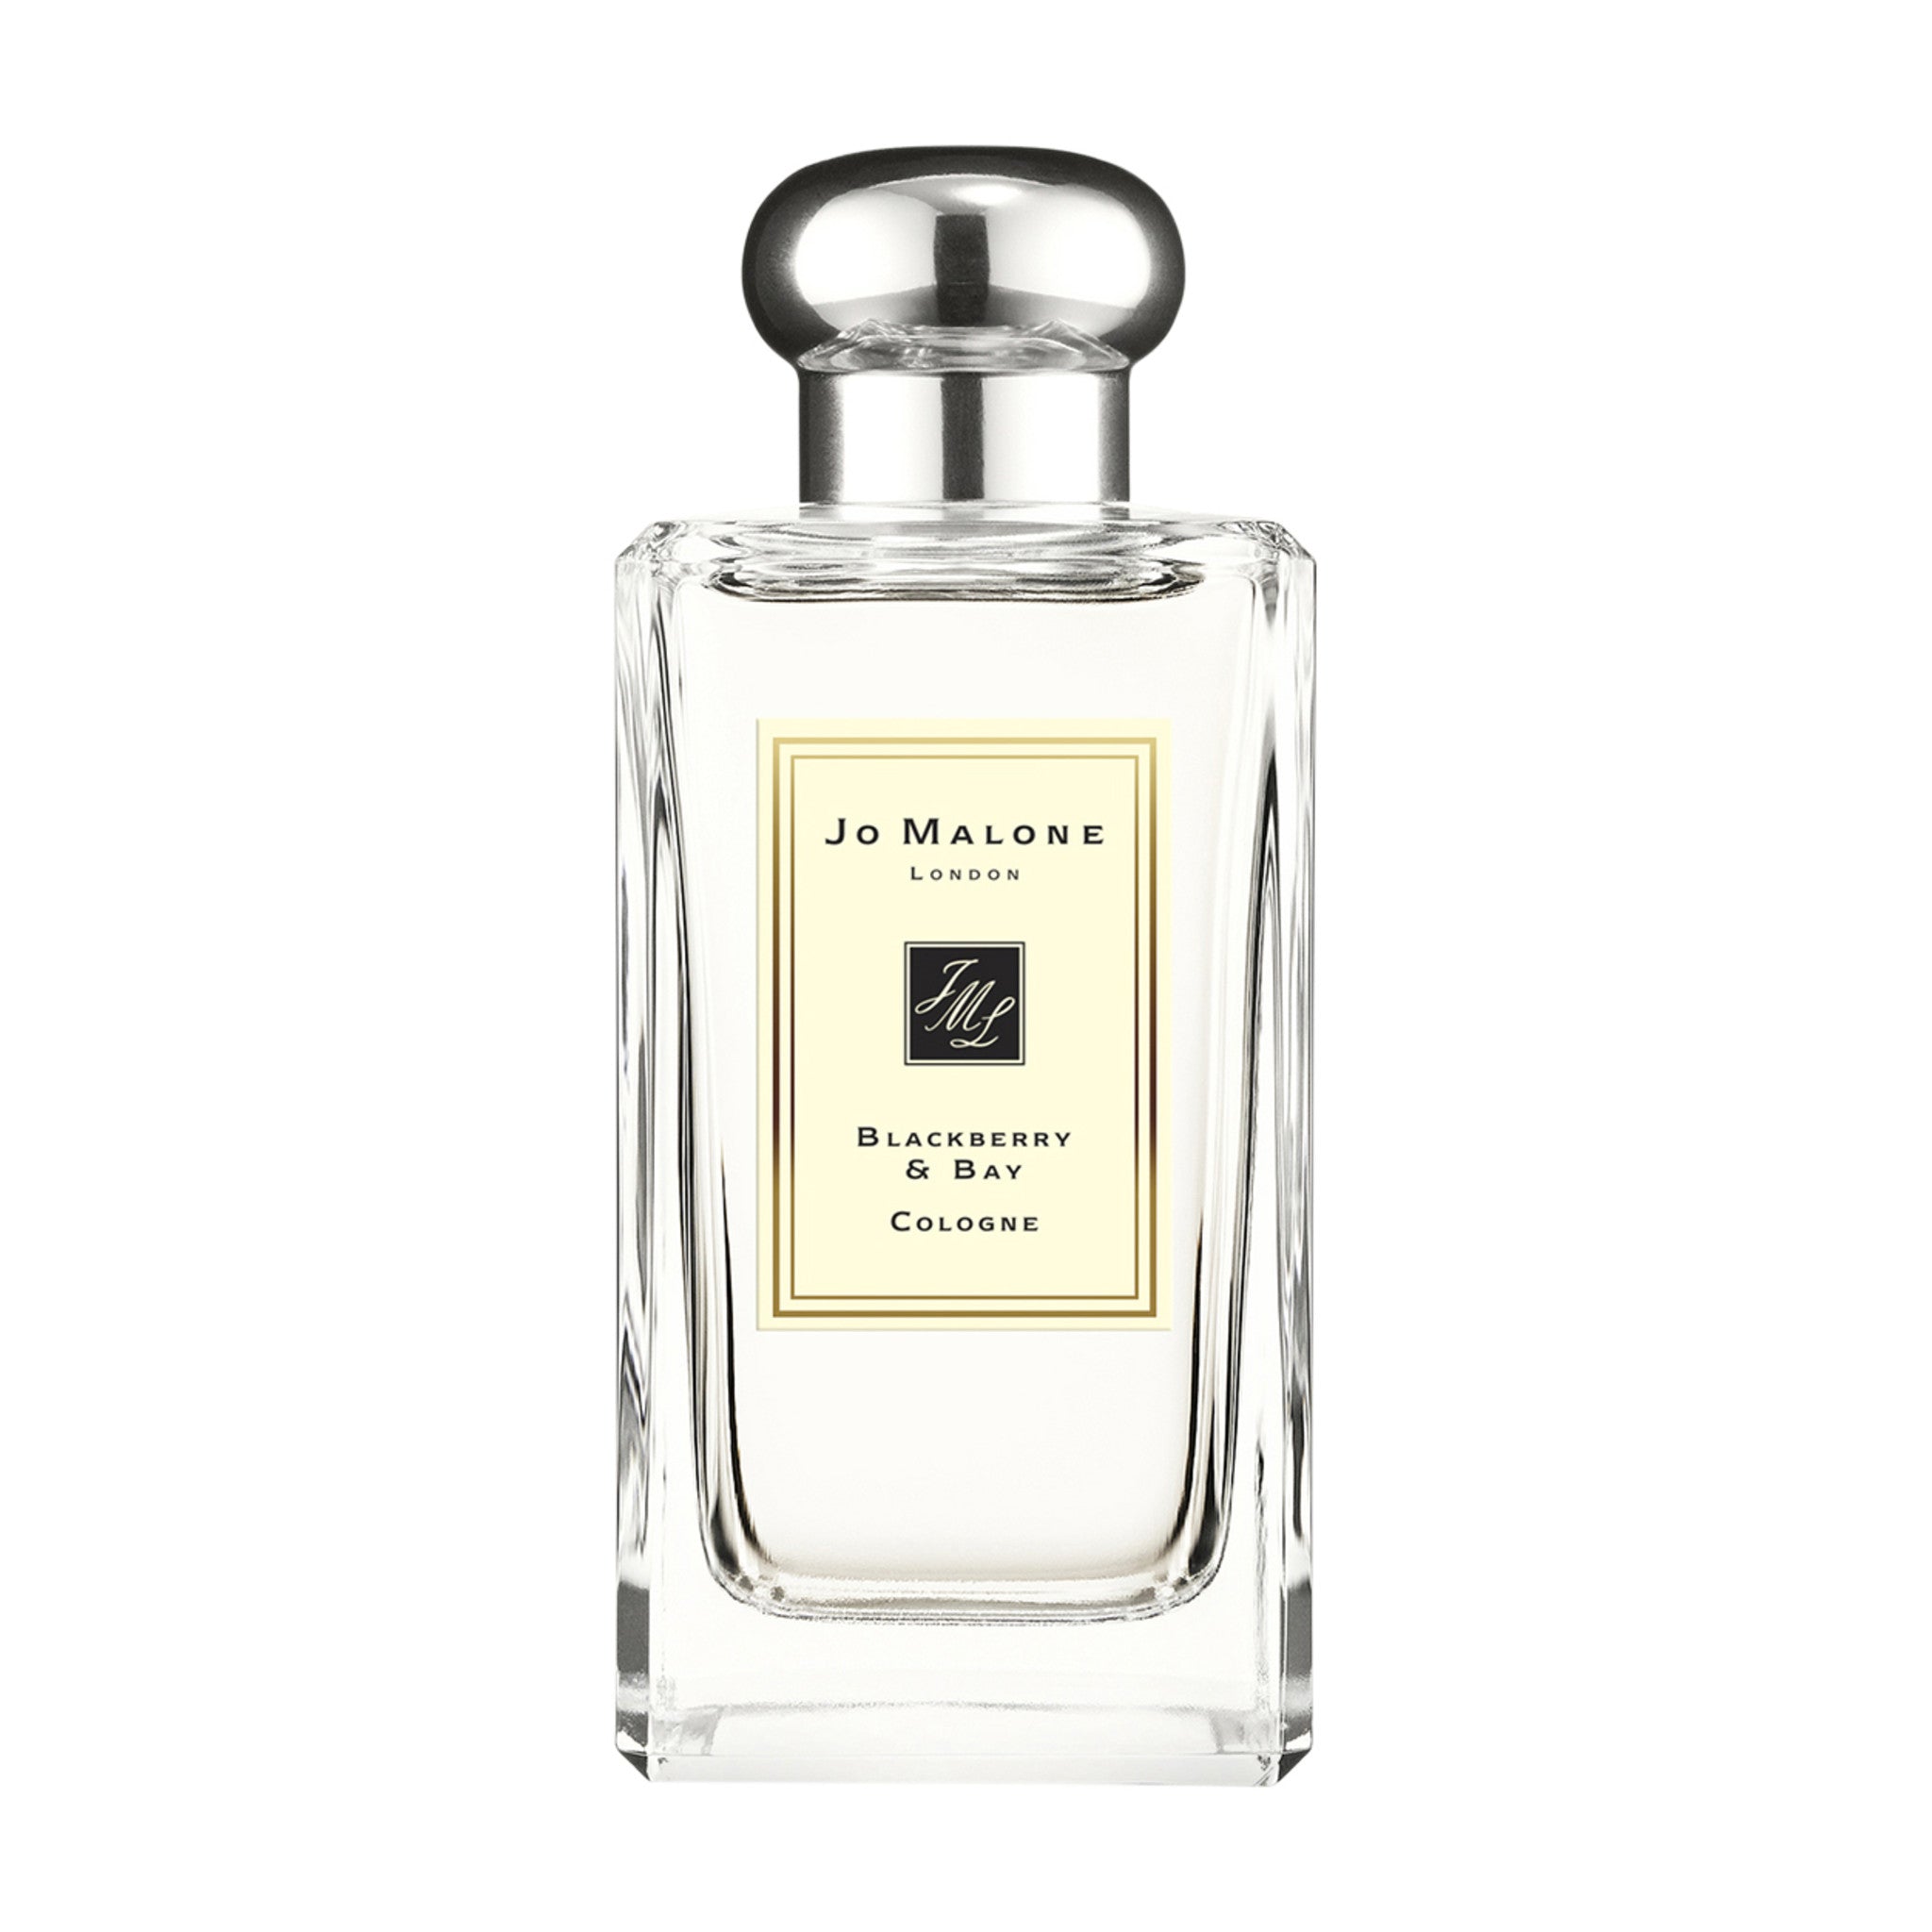 Jo Malone London Blackberry and Bay Cologne Size variant: 100 ml main image.